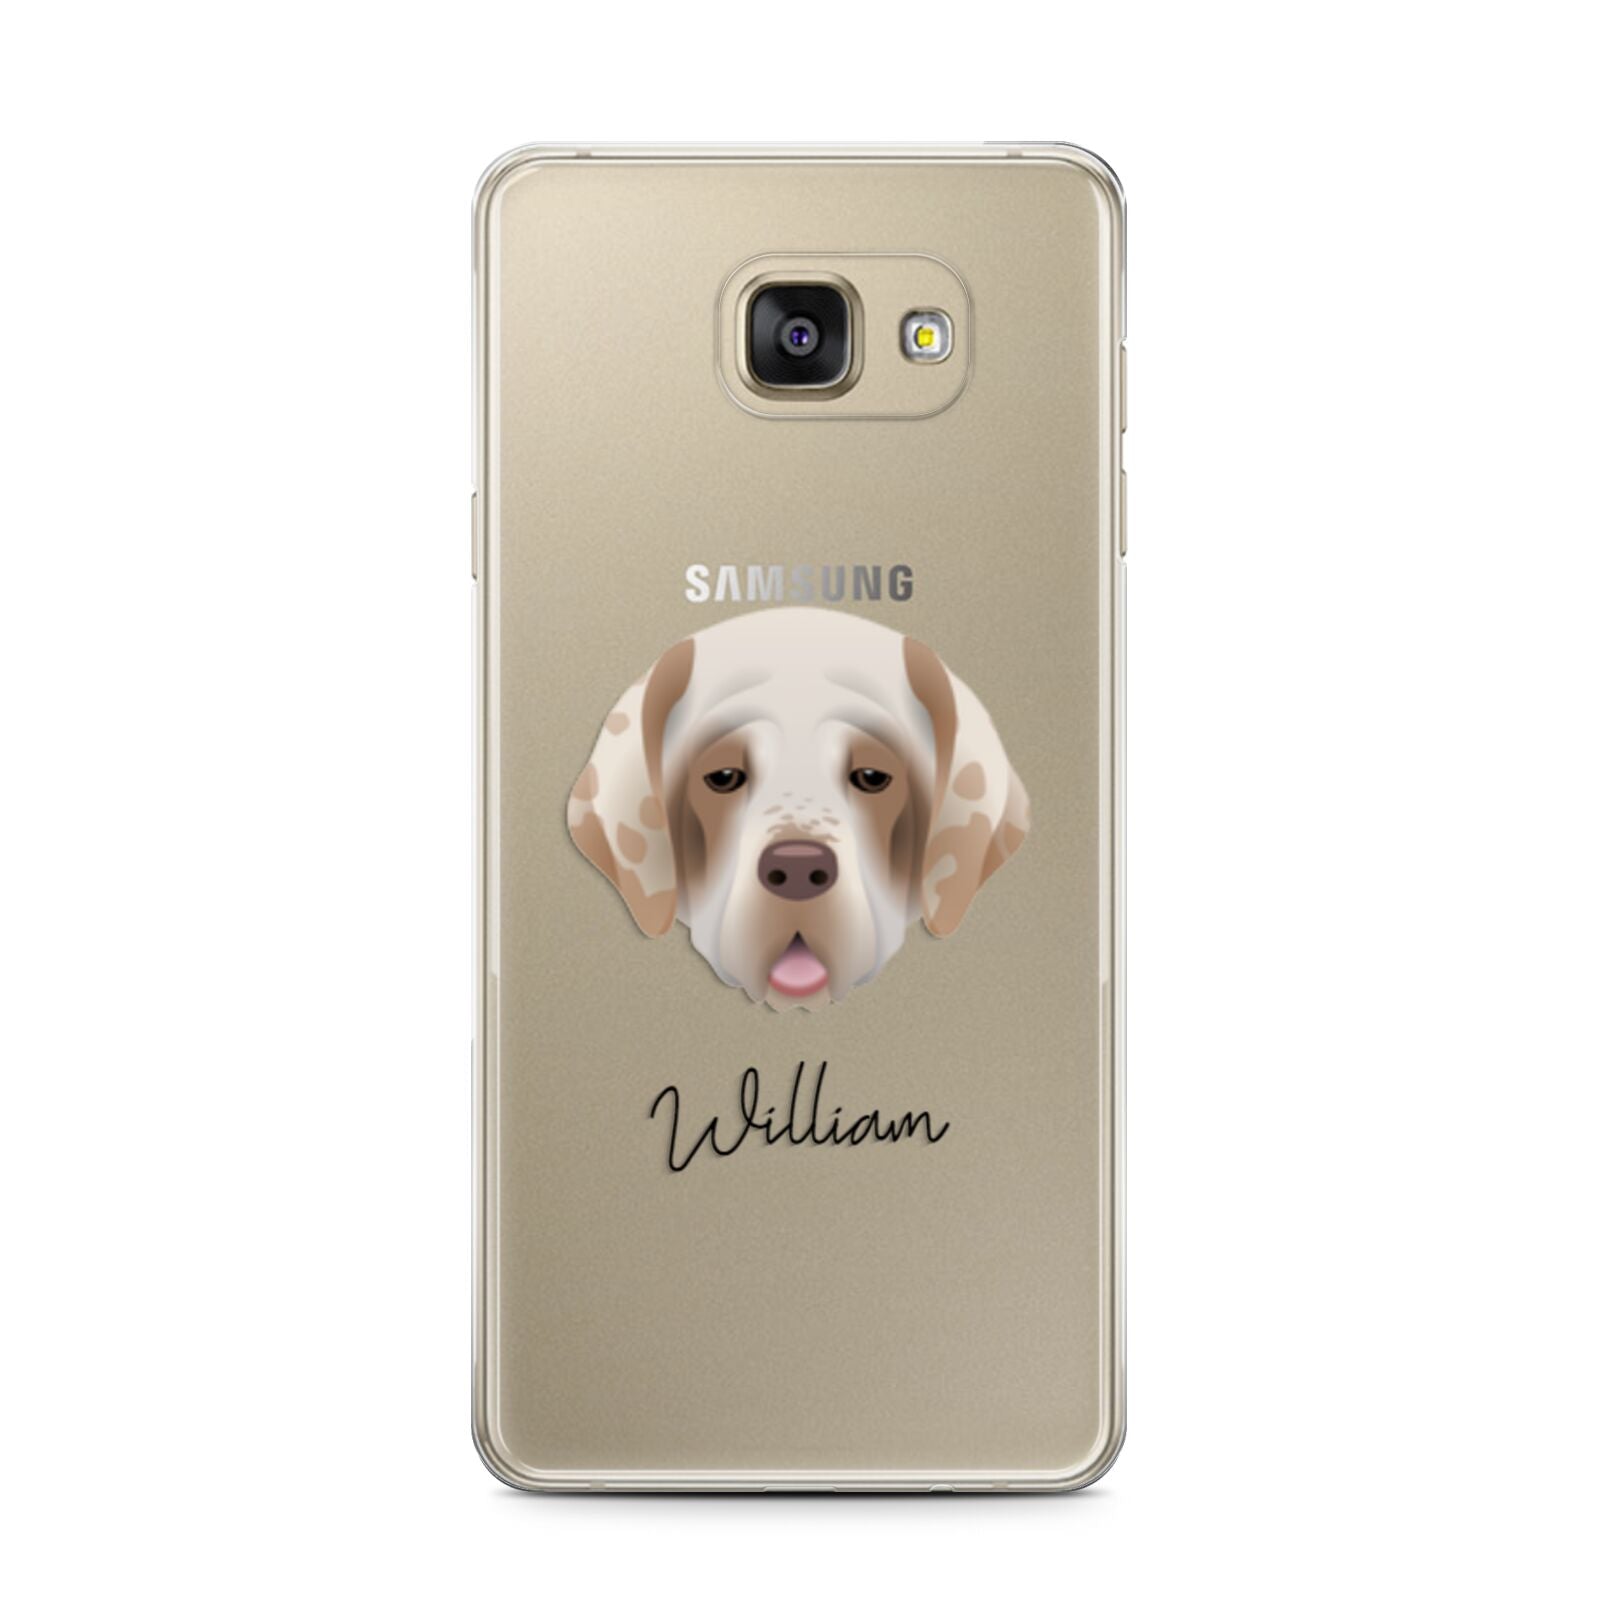 Cirneco Dell Etna Personalised Samsung Galaxy A7 2016 Case on gold phone